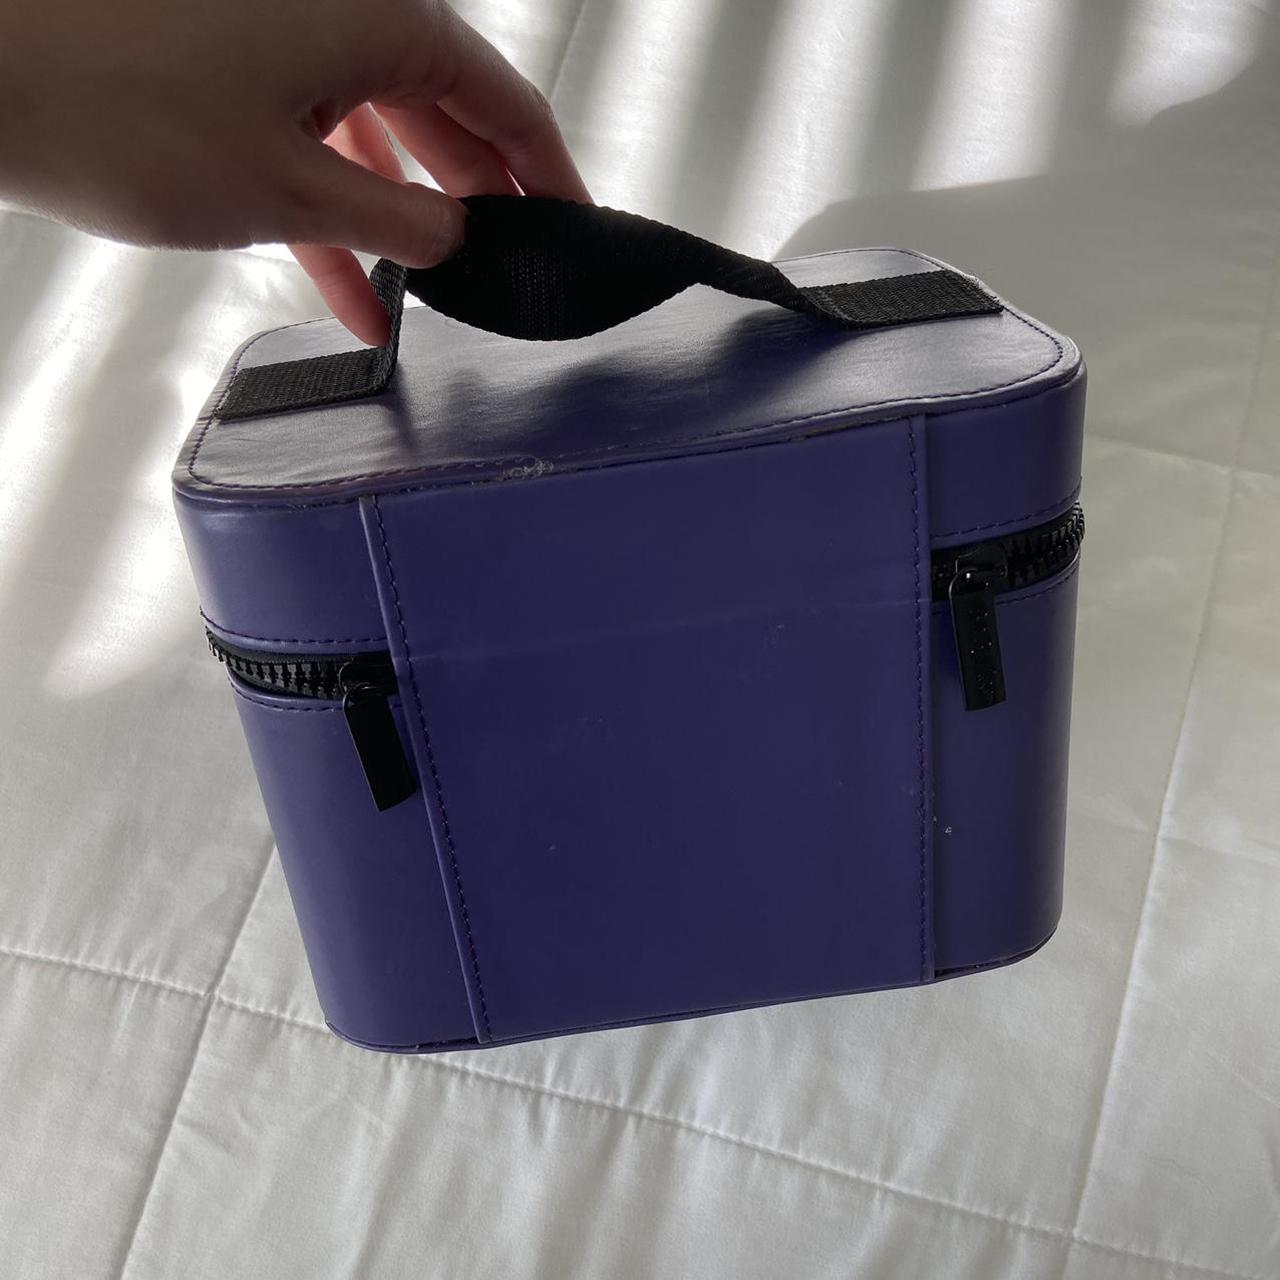 Product Image 3 - Purple Makeup Case

Shipping $6.75

In good